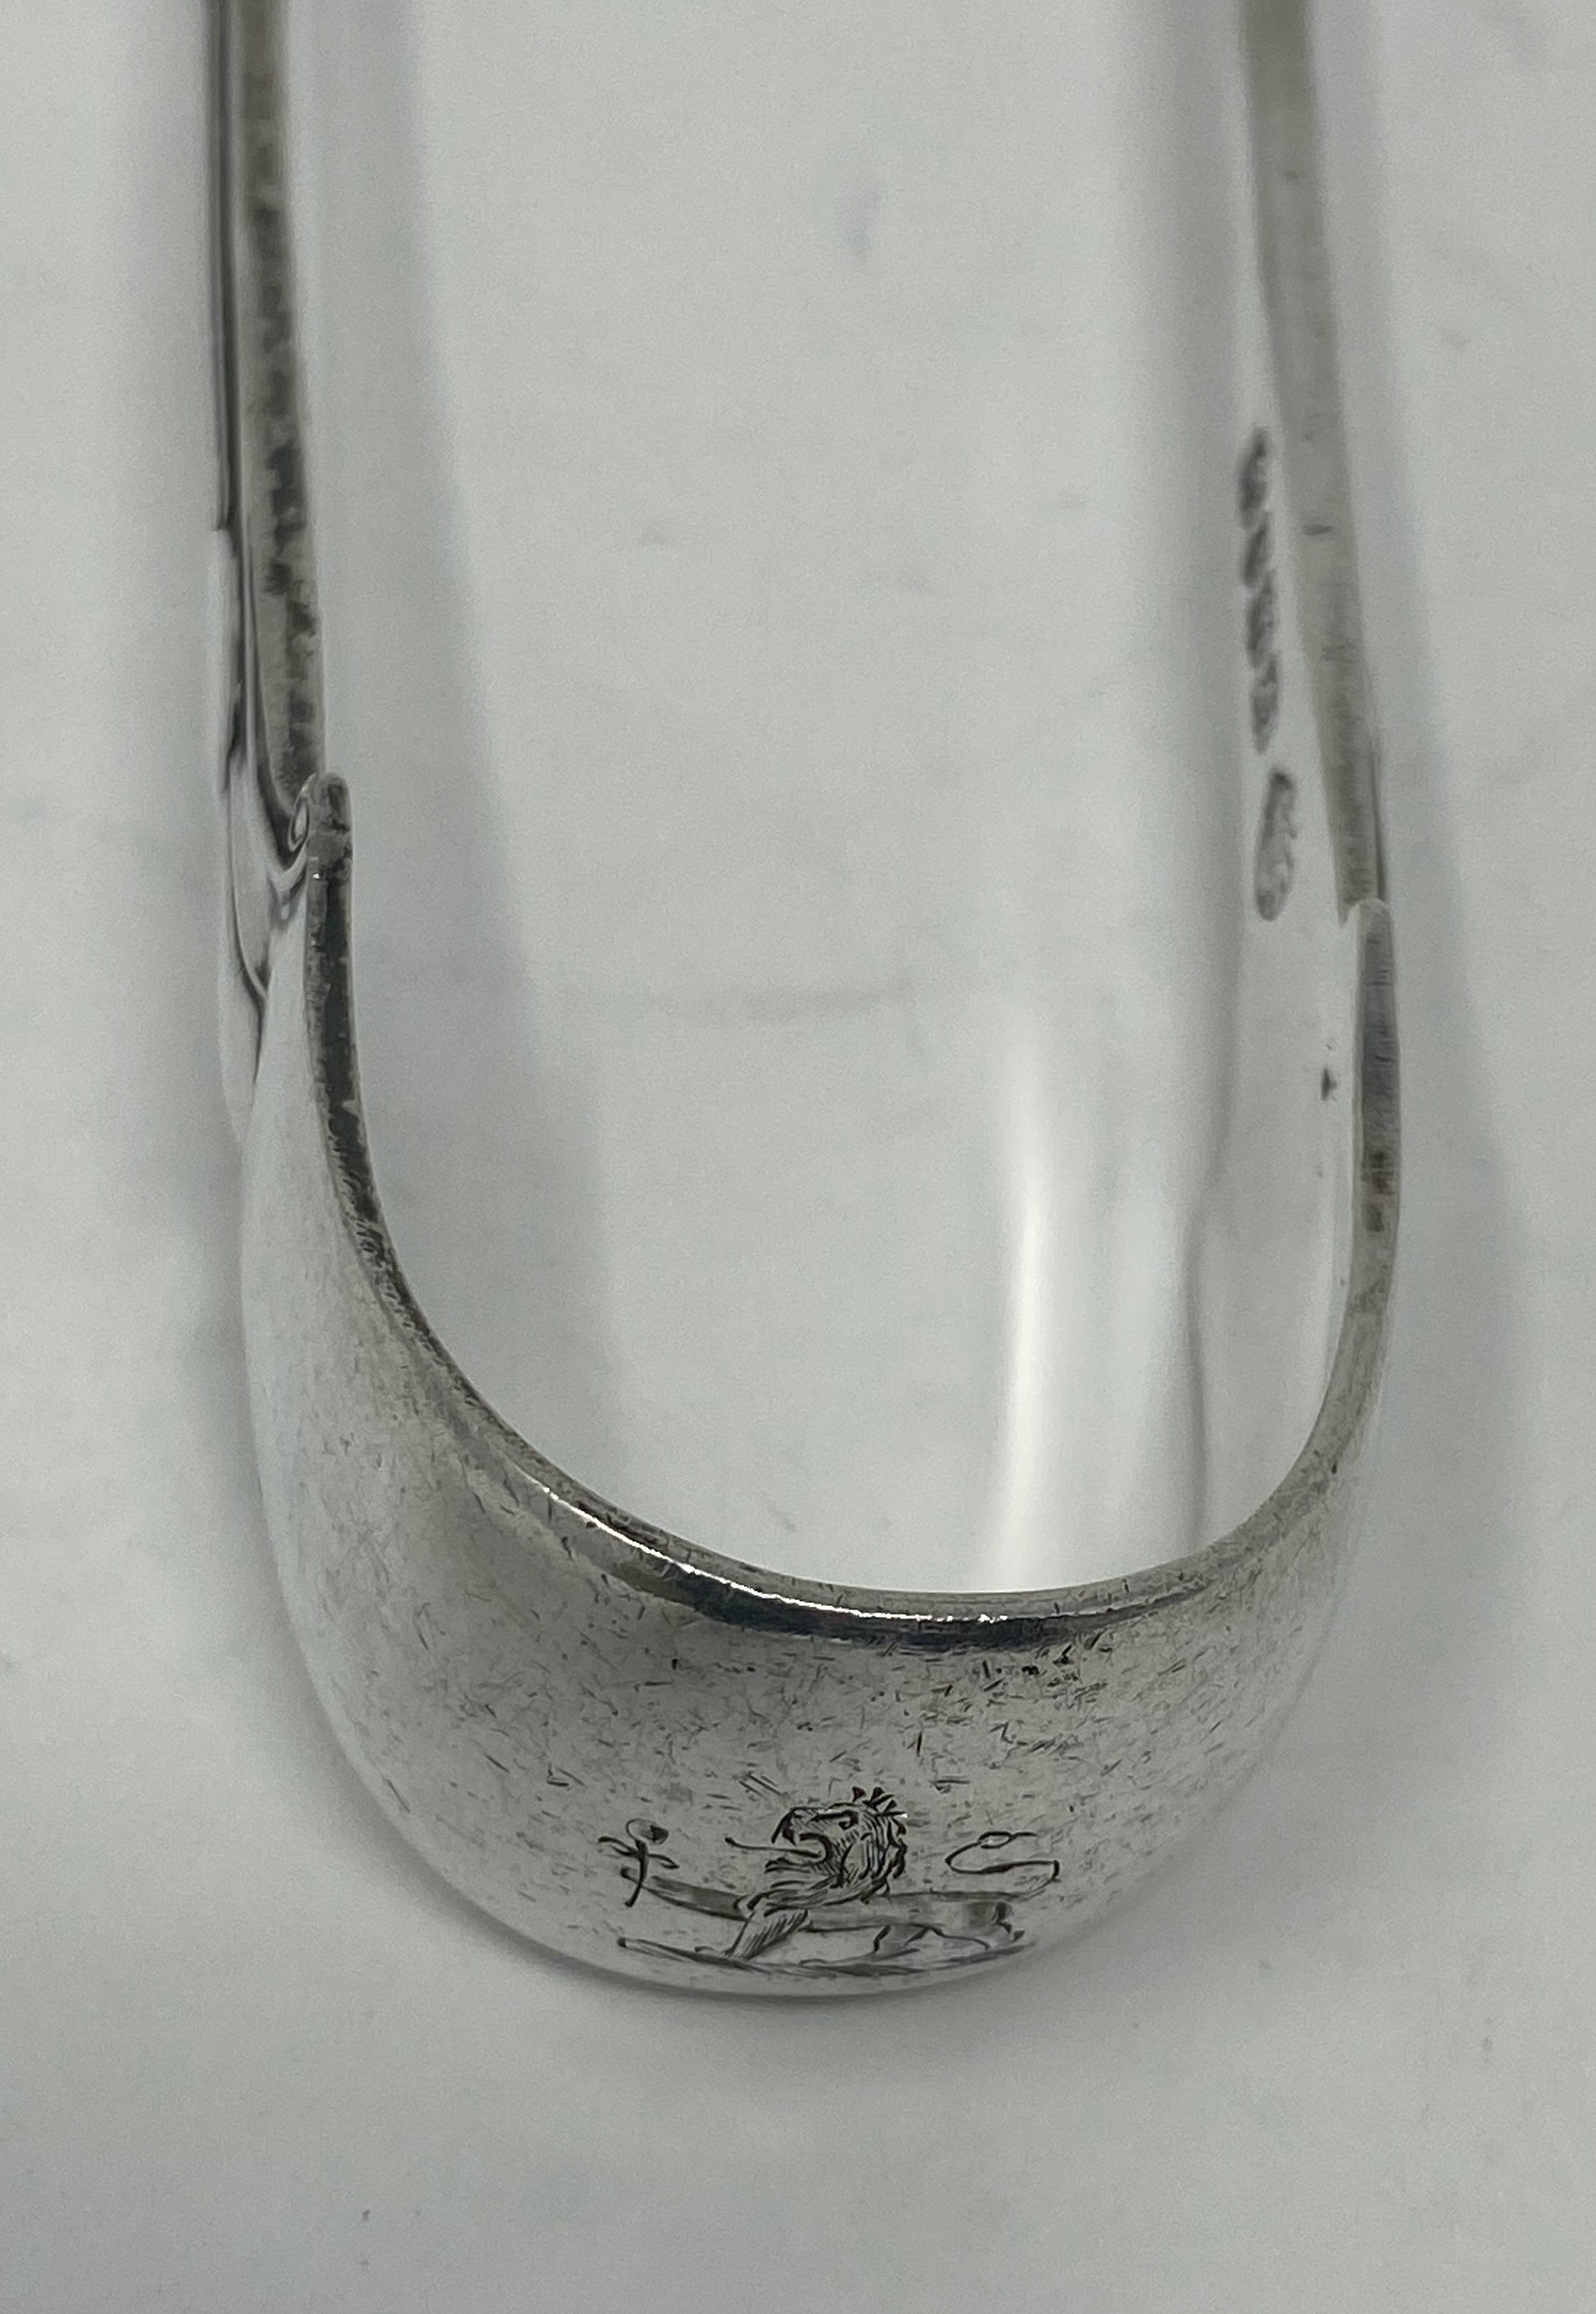 Antique Silver Plated Onslow Pattern Tongs - Sugar or Ice